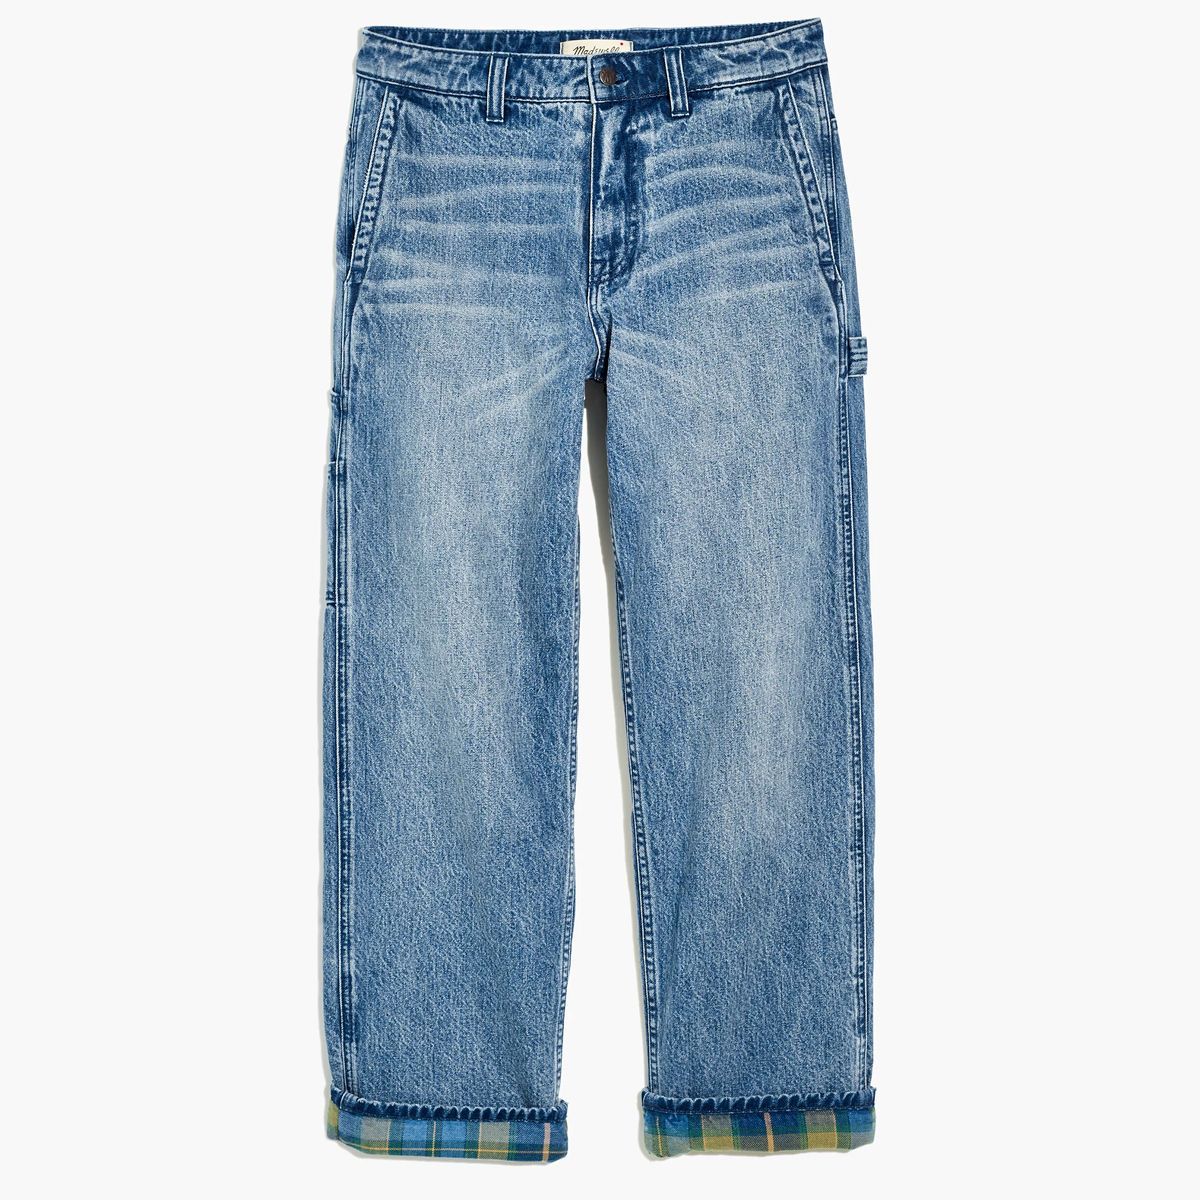 10 Best Flannel-Lined Jeans for Men 2023